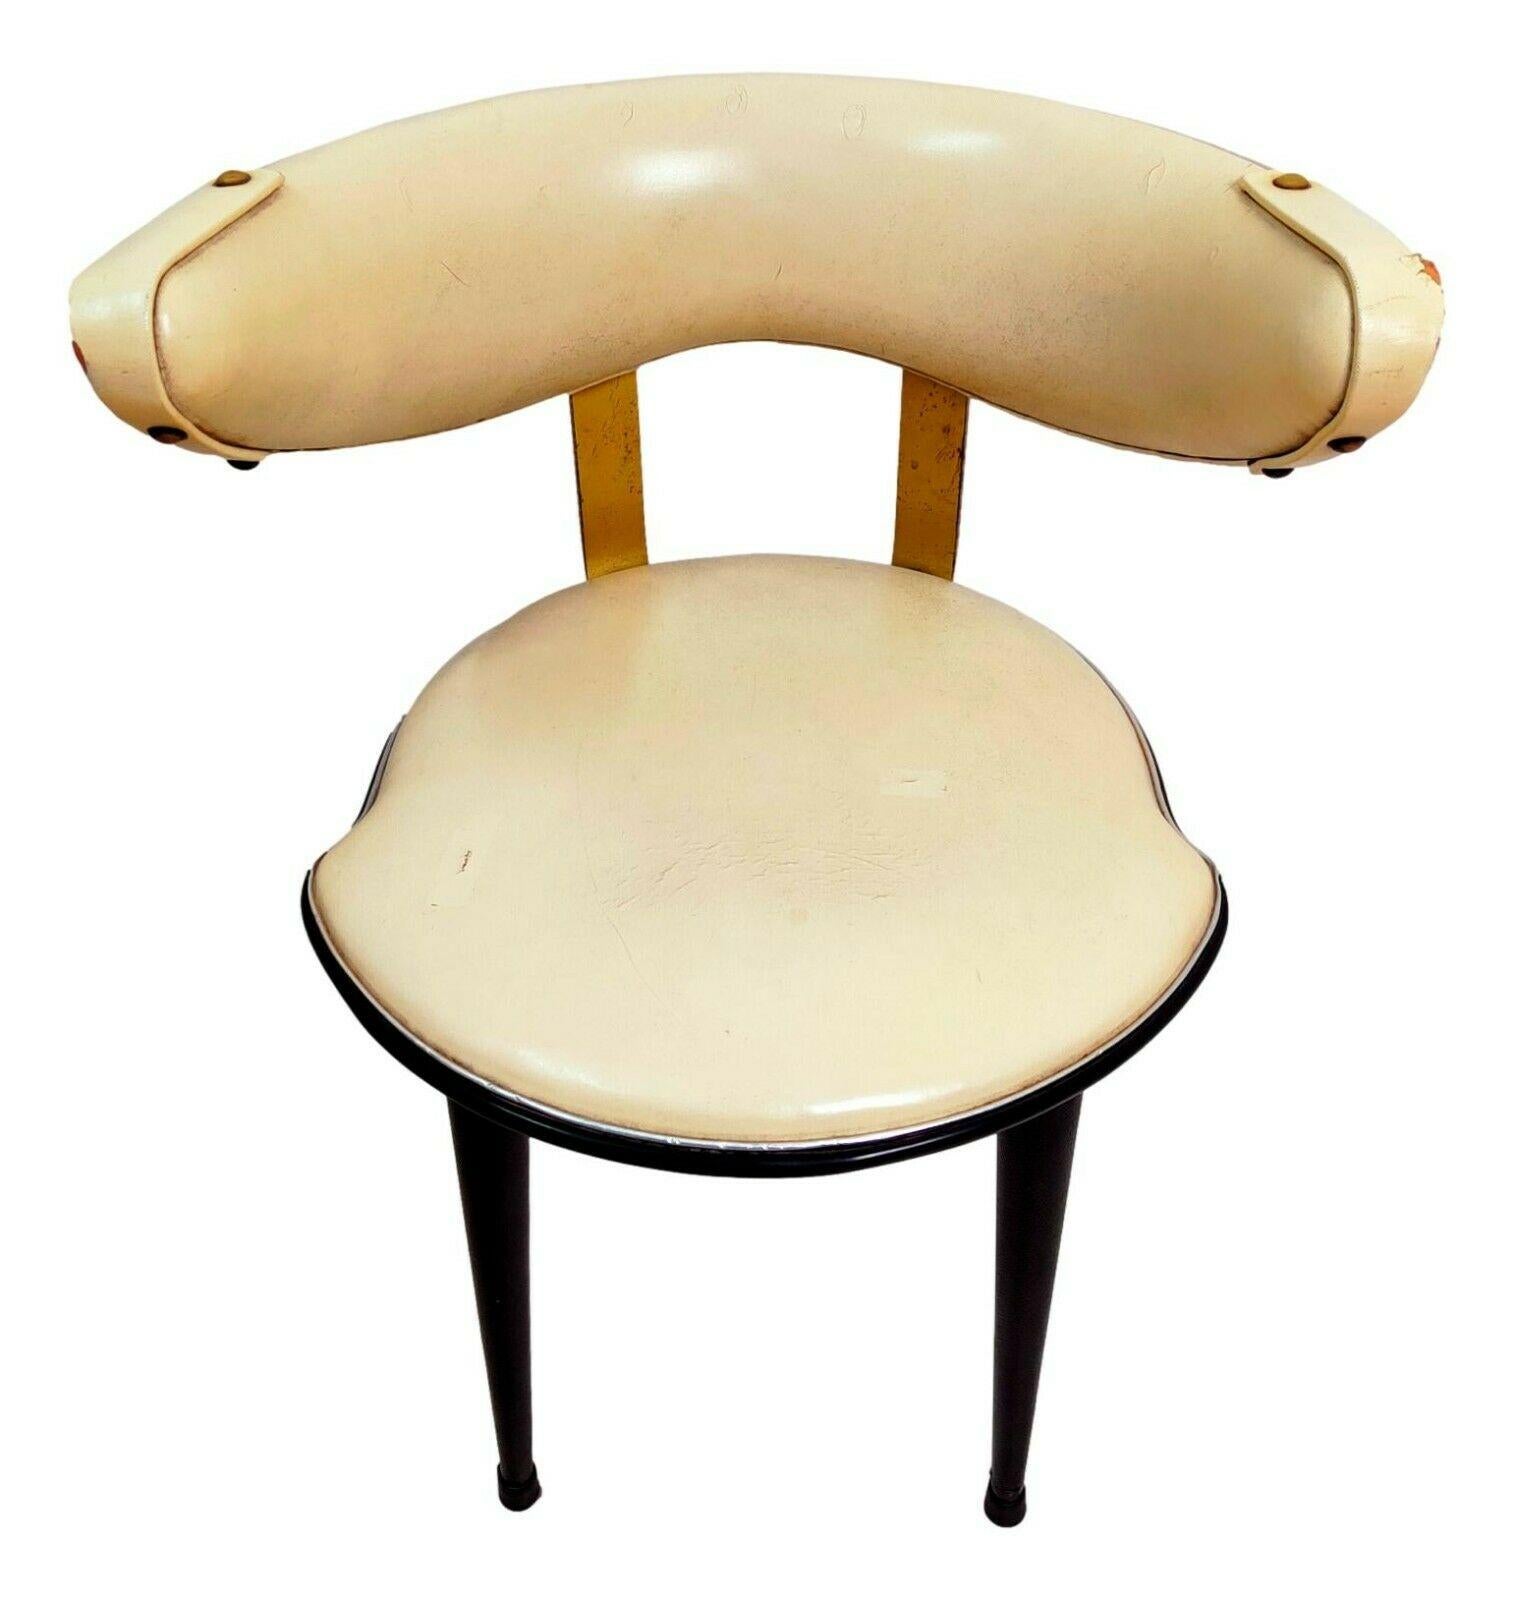 Italian Collectible Armchair Design Umberto Mascagni, 1960s For Sale